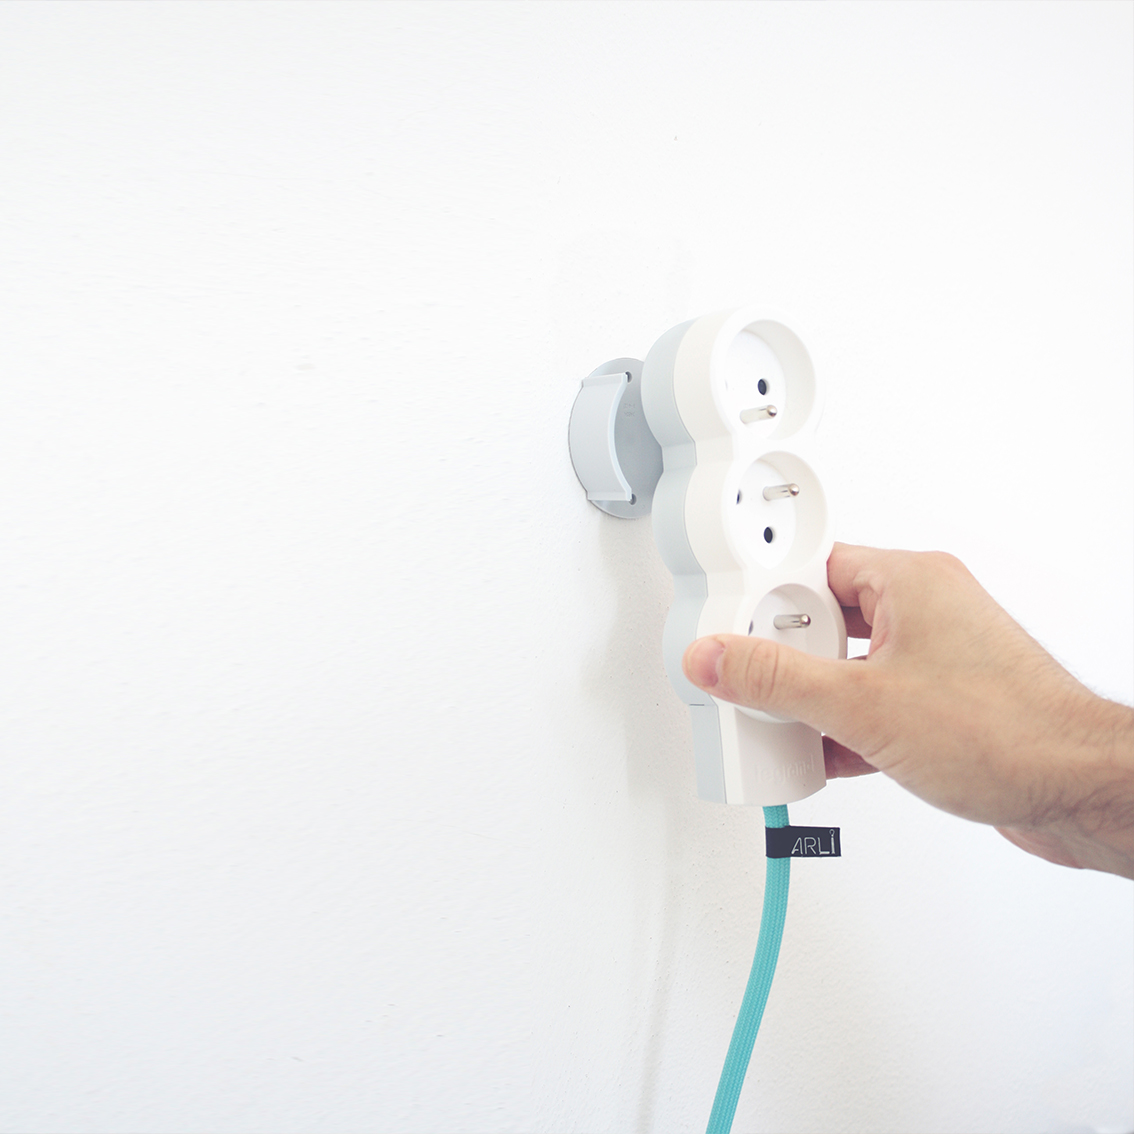 Extension cord with wall mount and colorful textile cable